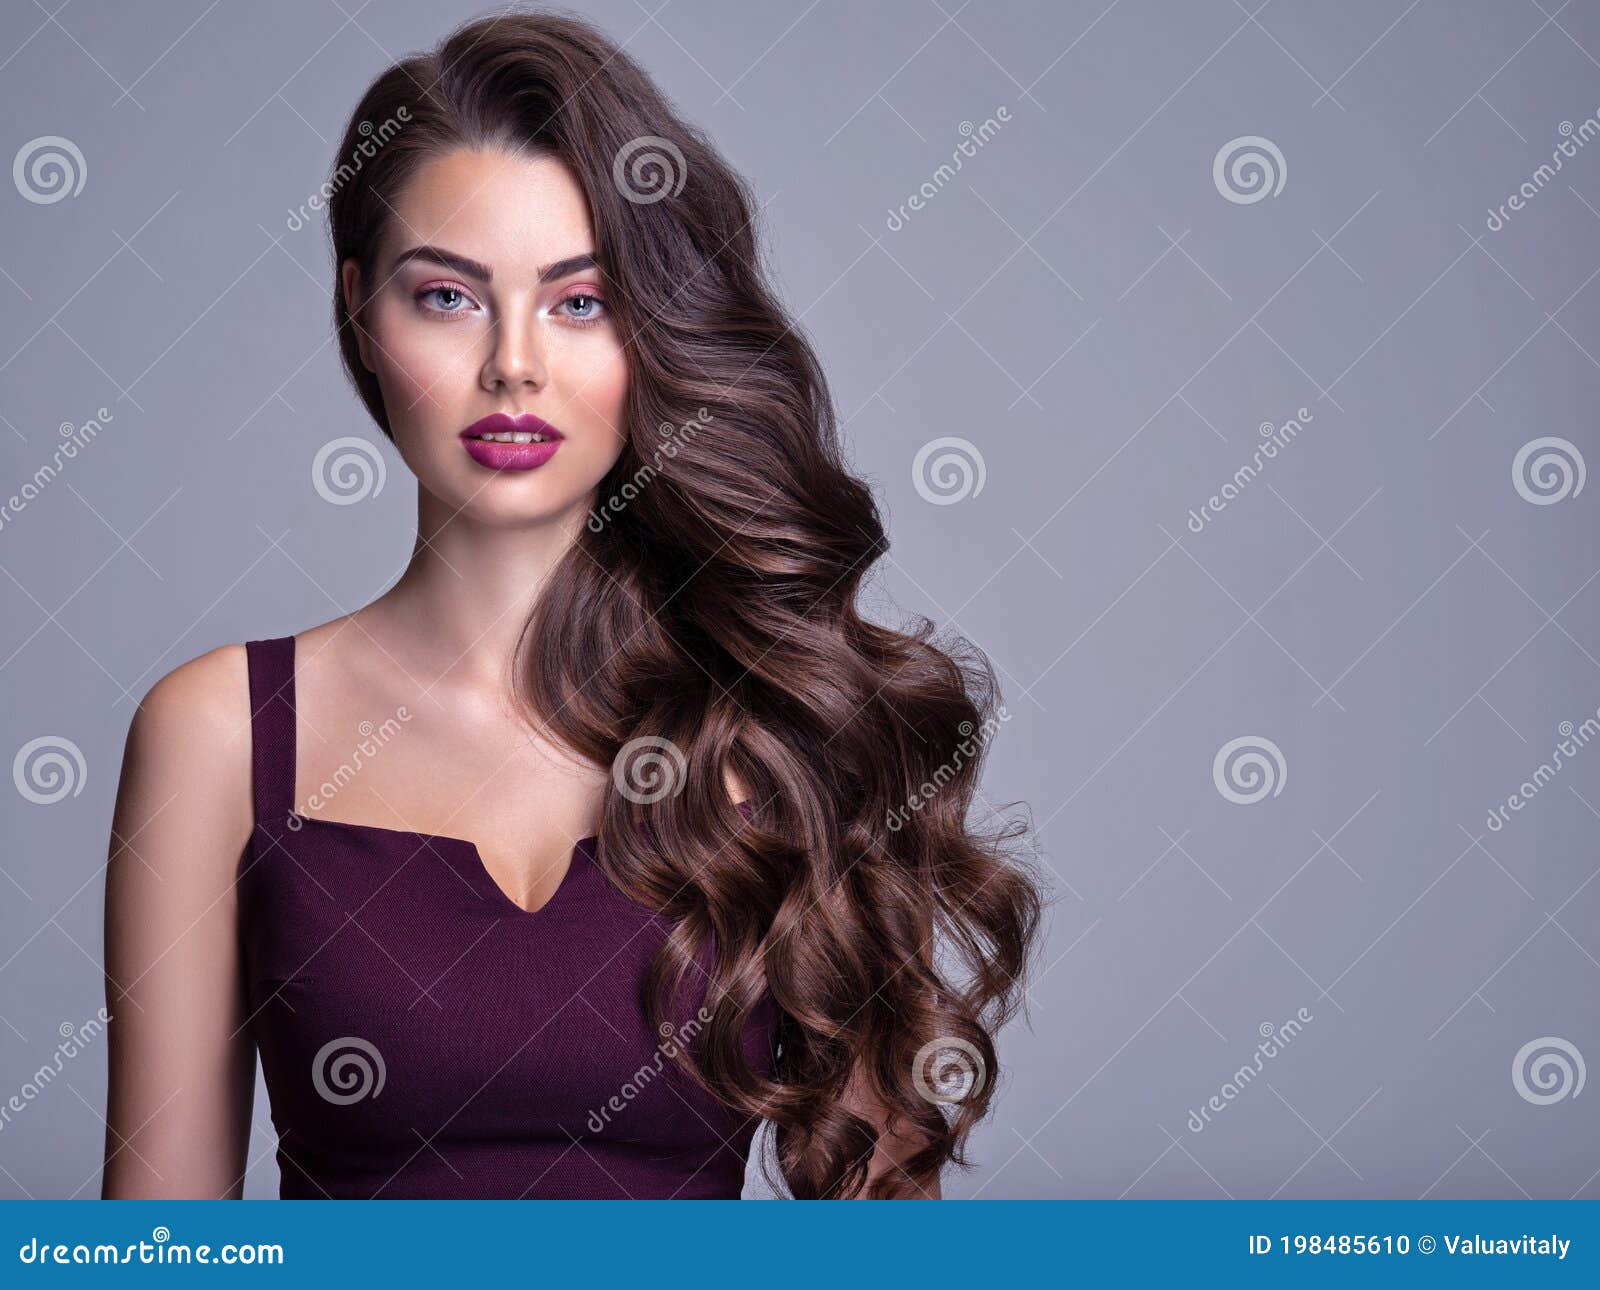 Face of a Beautiful Woman with Long Brown Curly Hair. Fashion Model with Wavy  Hairstyle. Attractive Young Girl with Curly Hair Stock Photo - Image of  studio, girl: 198485610